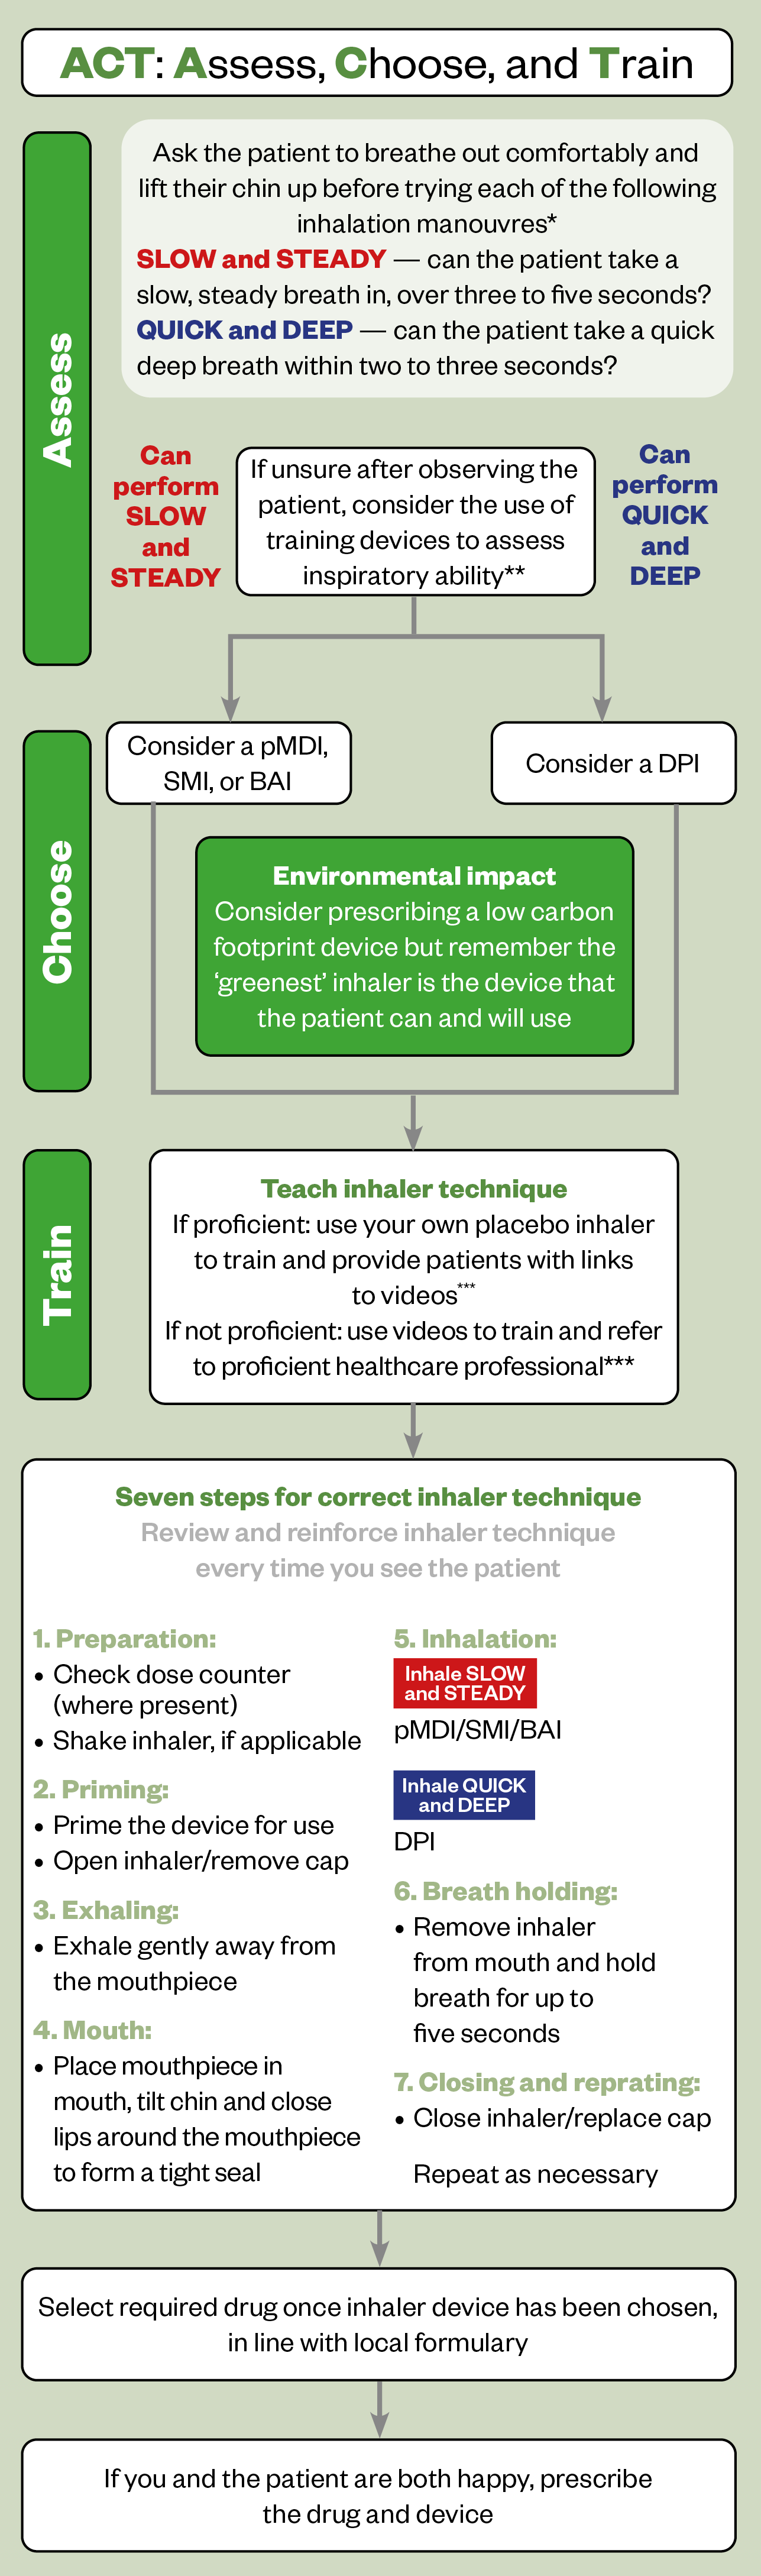 Figure 1: Assess, Choose, Train (ACT) decision tool for inhaler selection